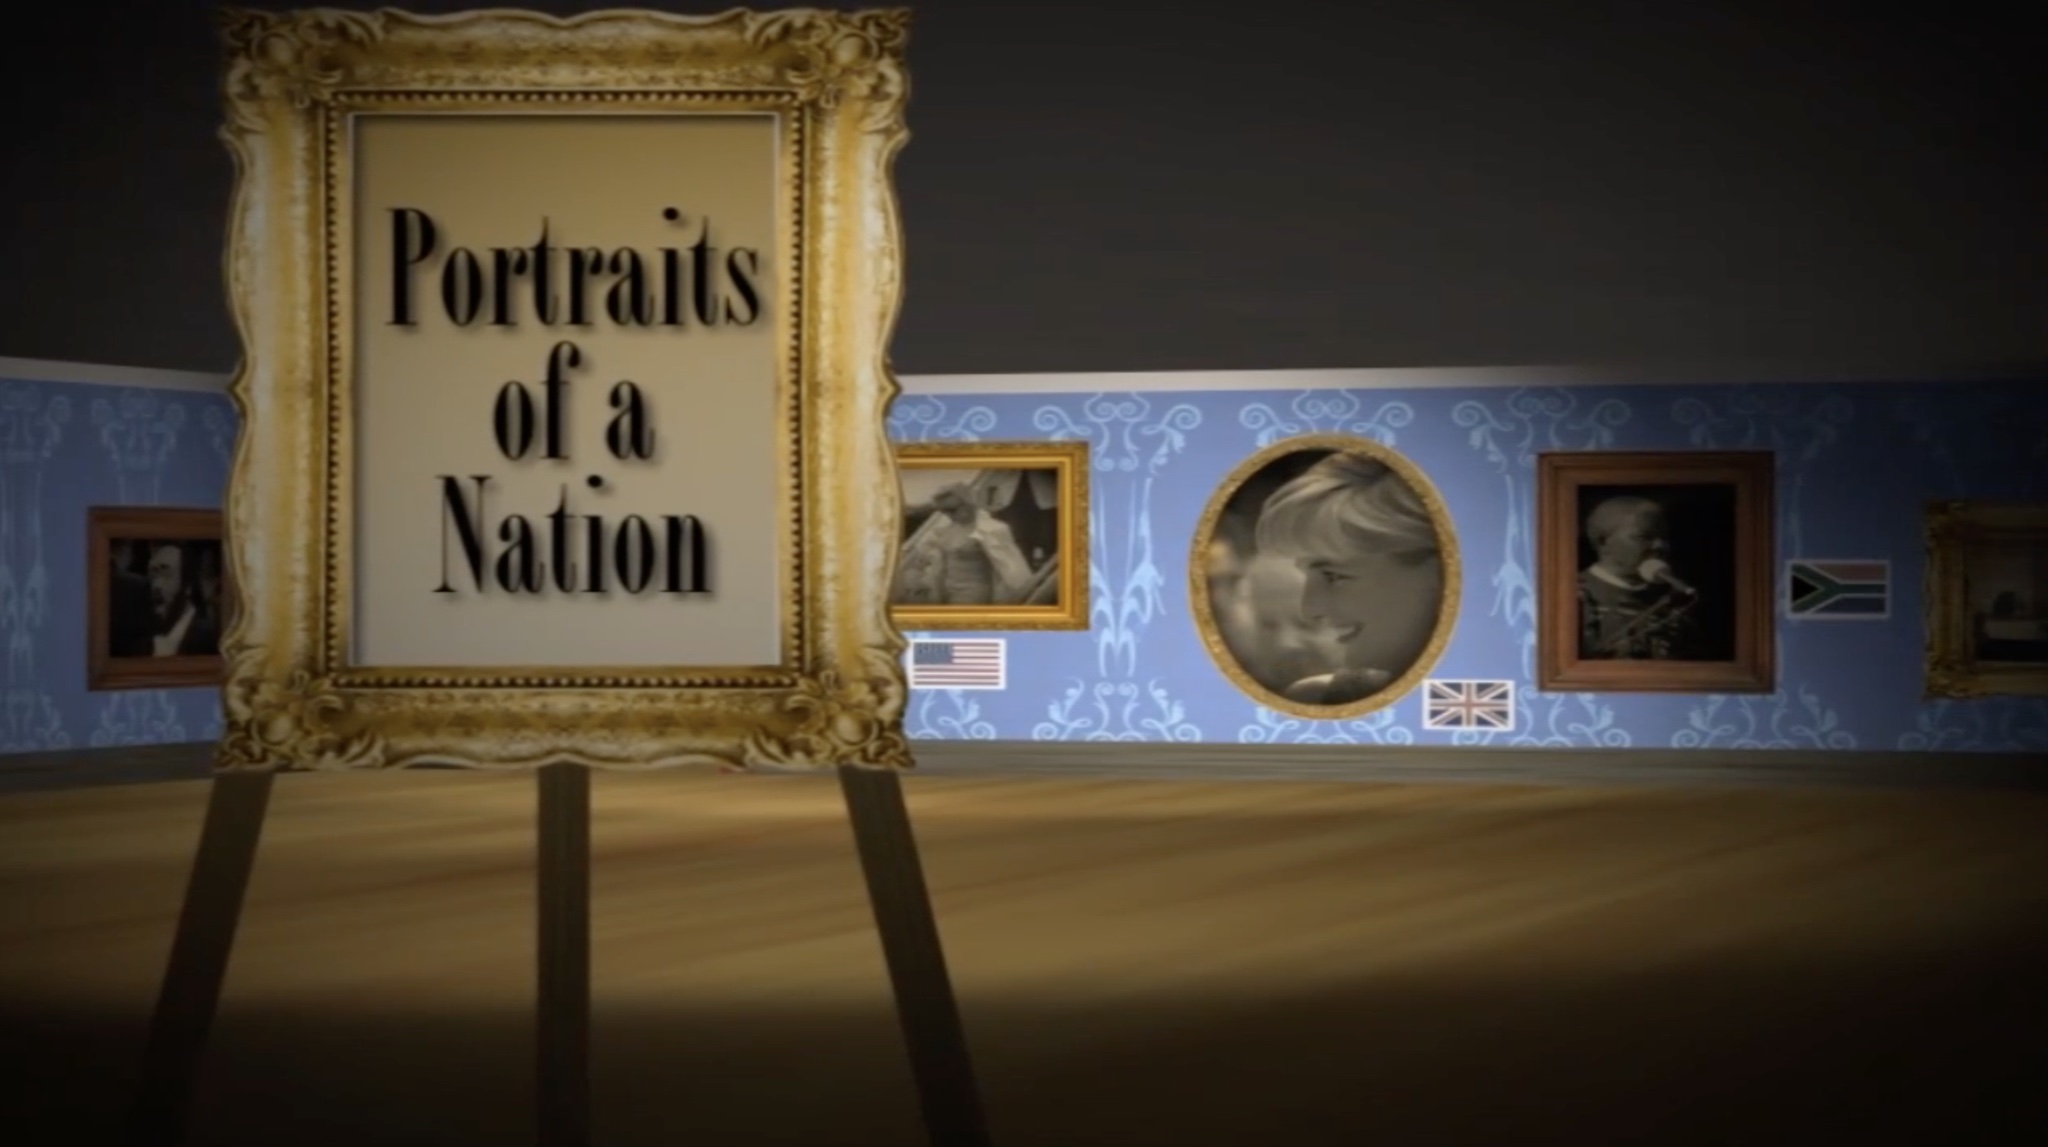 Portraits of a Nation